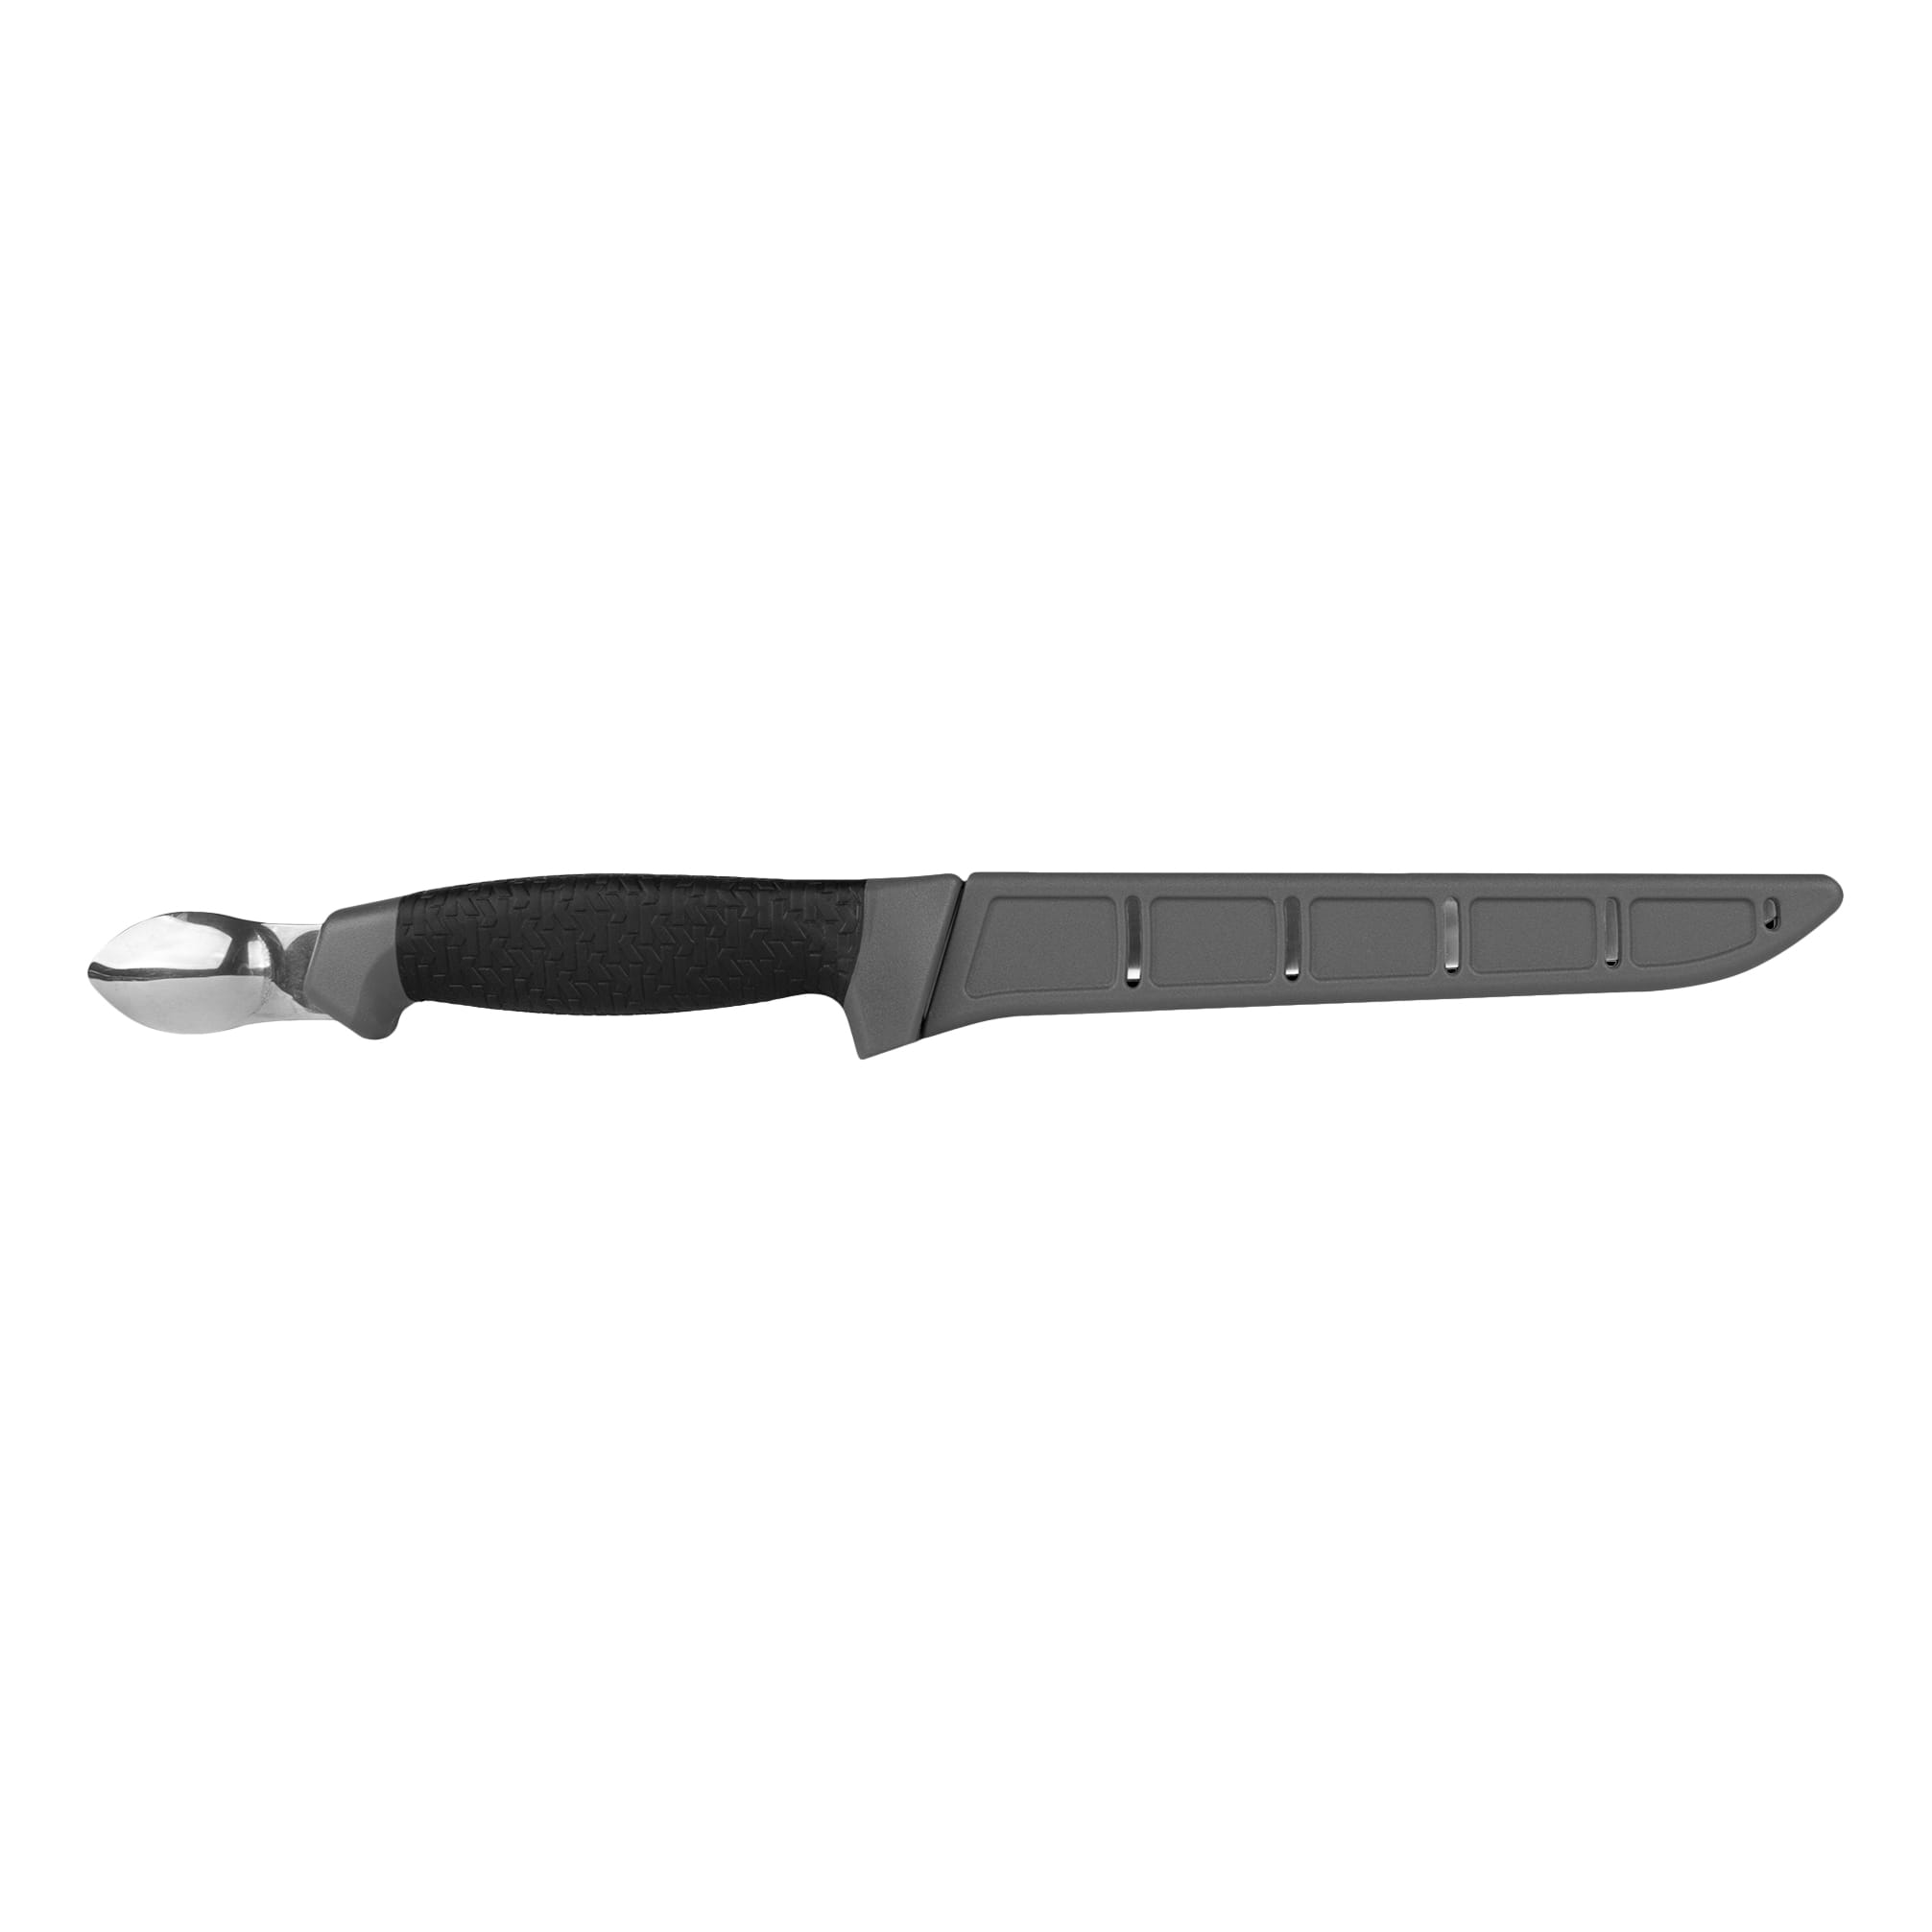 Kershaw® 7” Boning Knife with Spoon - with blade protector